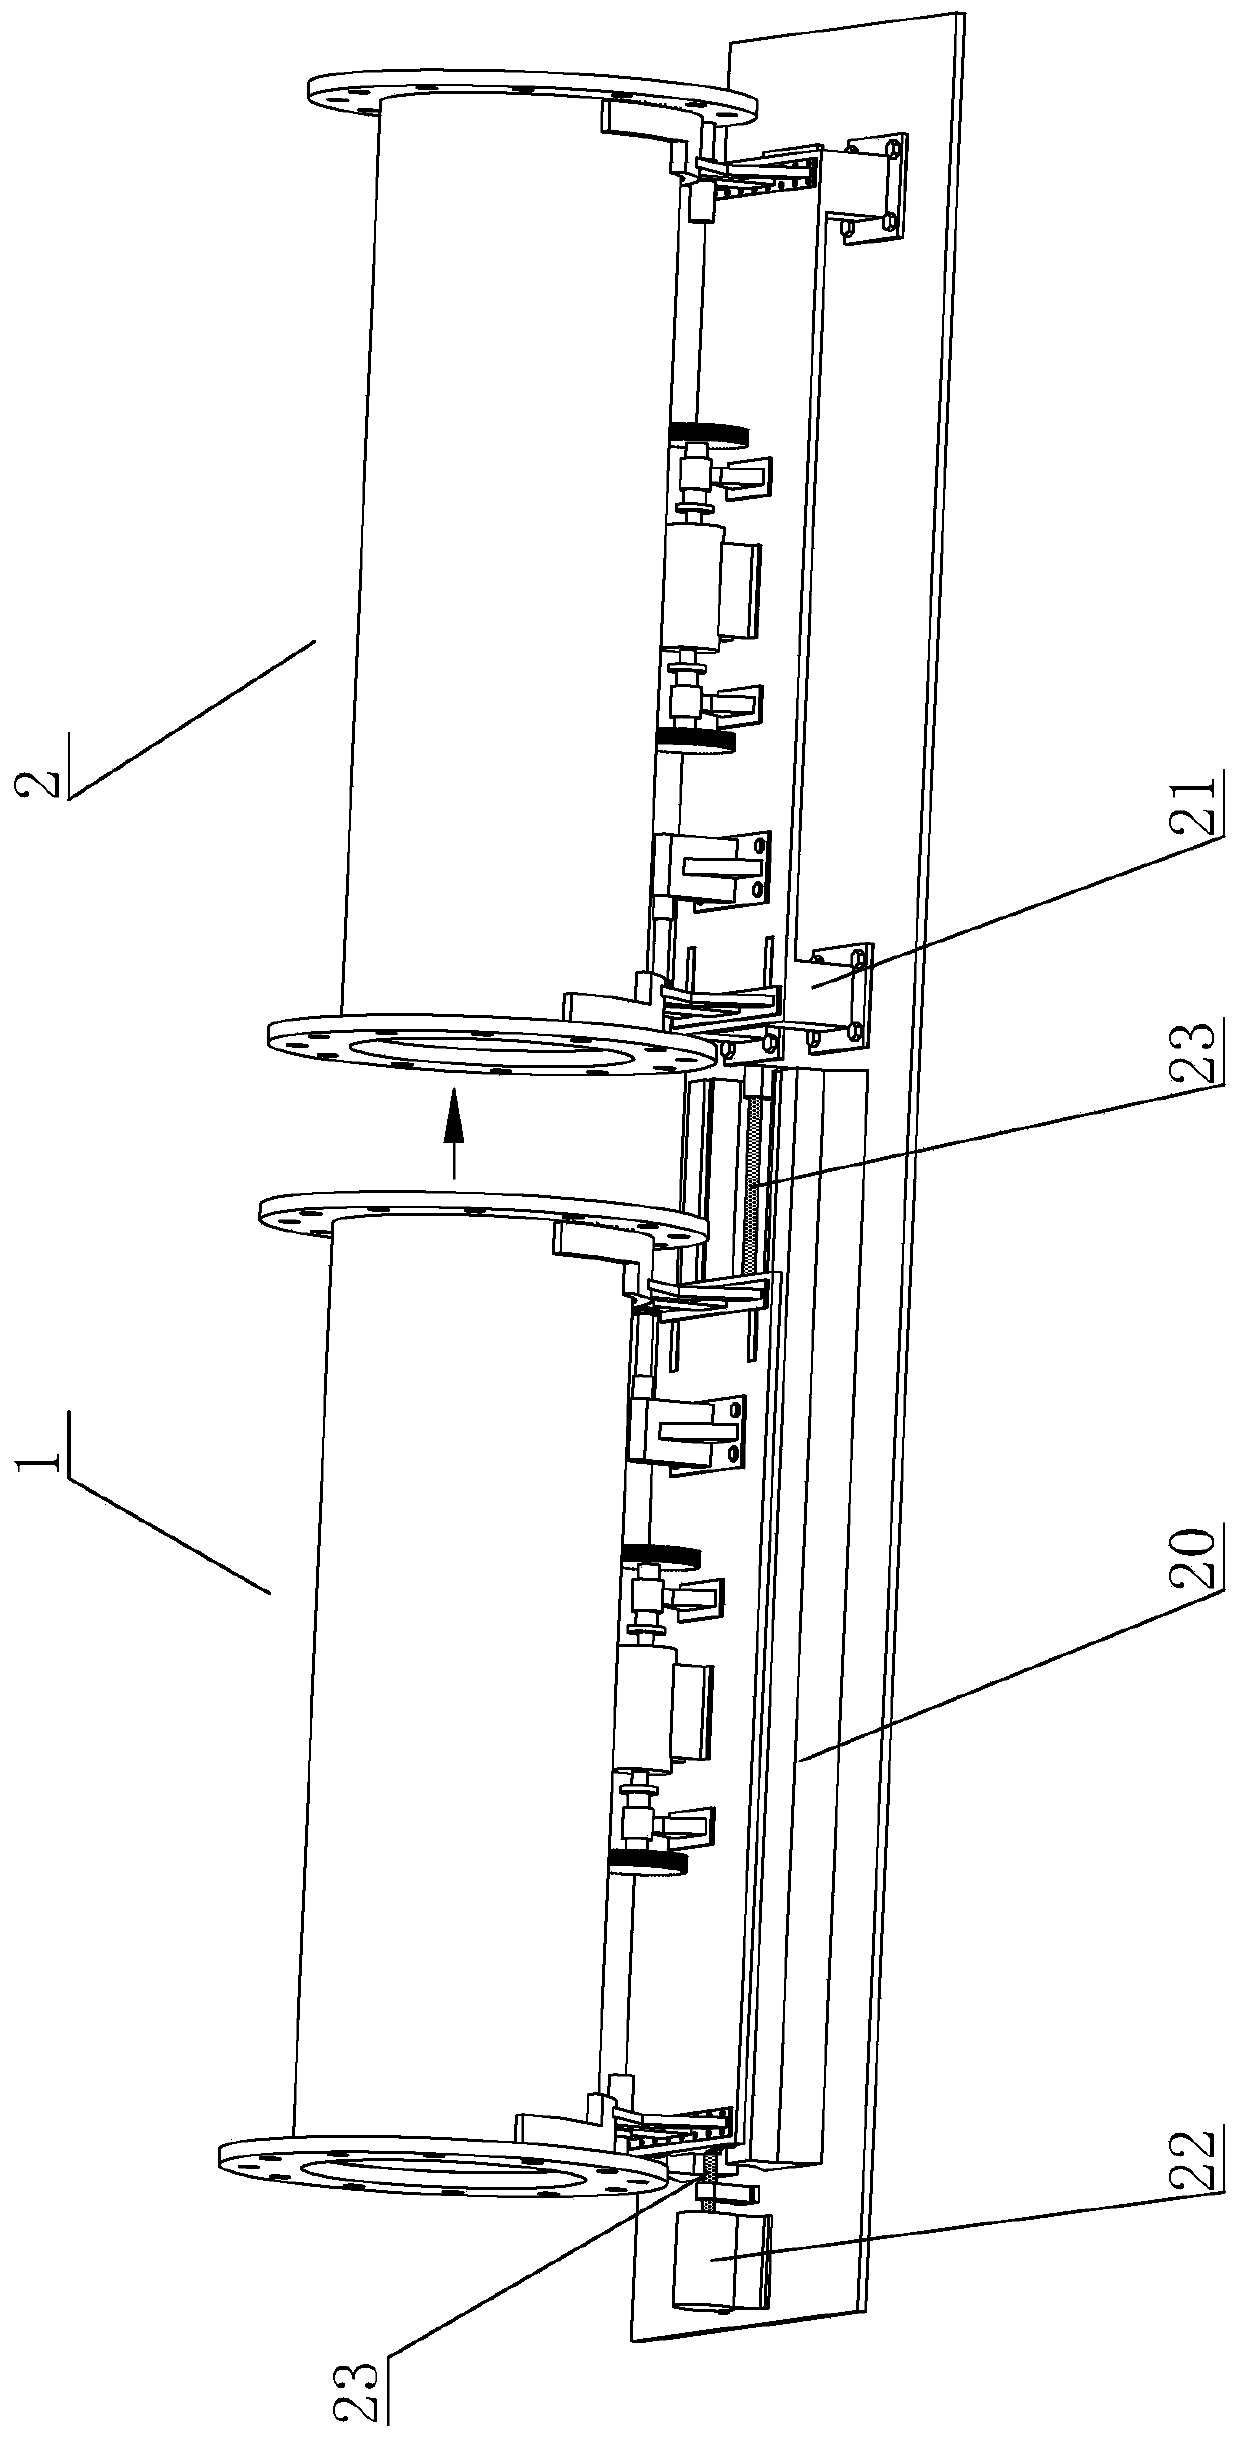 Engineering pipeline abut-joint auxiliary frame